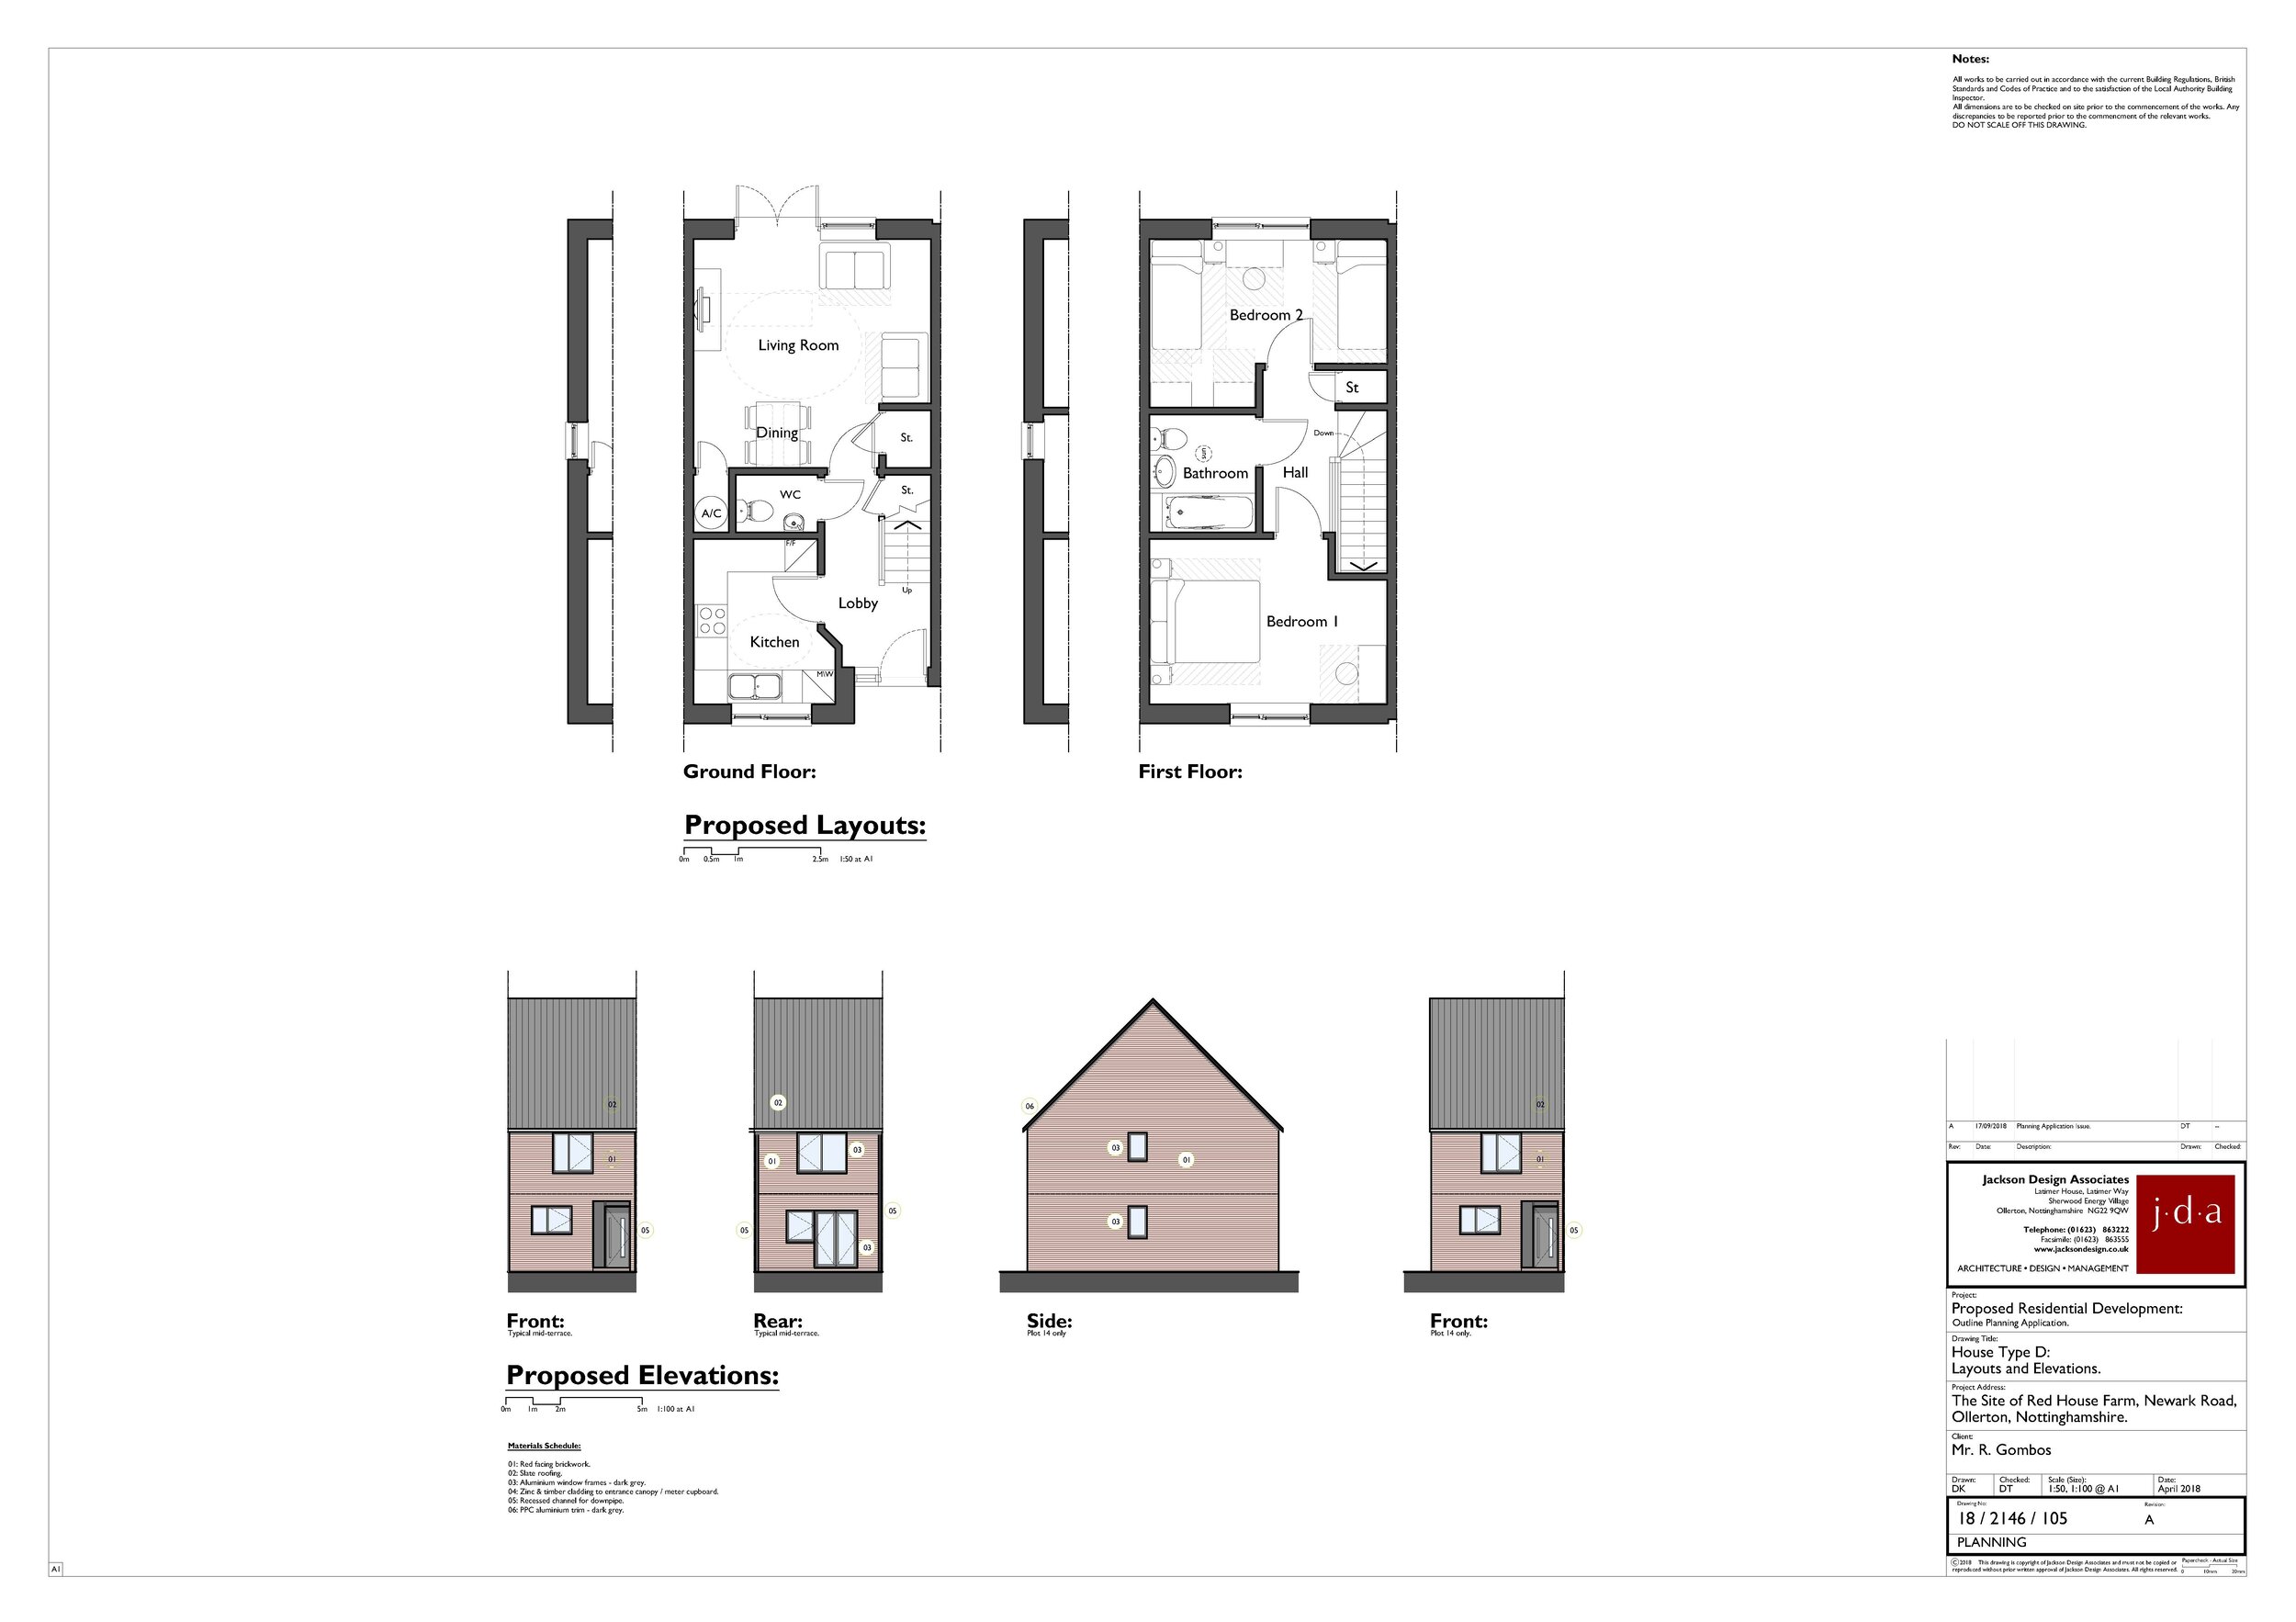 18_01898_OUTM-HOUSE_TYPE_D_-_LAYOUTS_AND_ELEVATIONS-909777.jpg